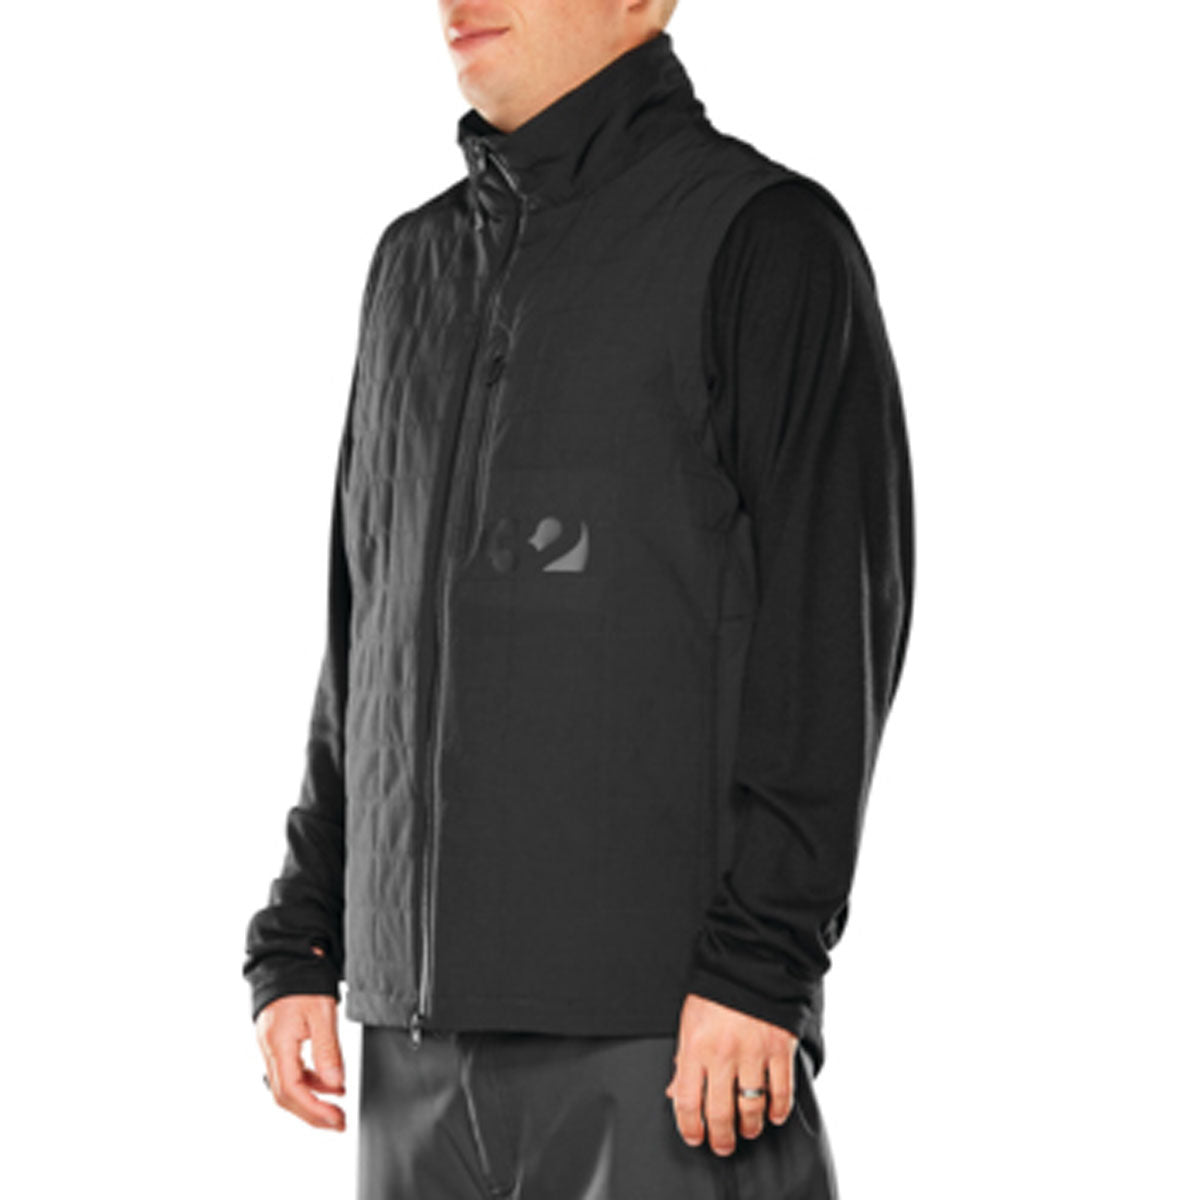 Thirty Two Rest Stop Puff Vest Snowboard Jacket - Black image 3